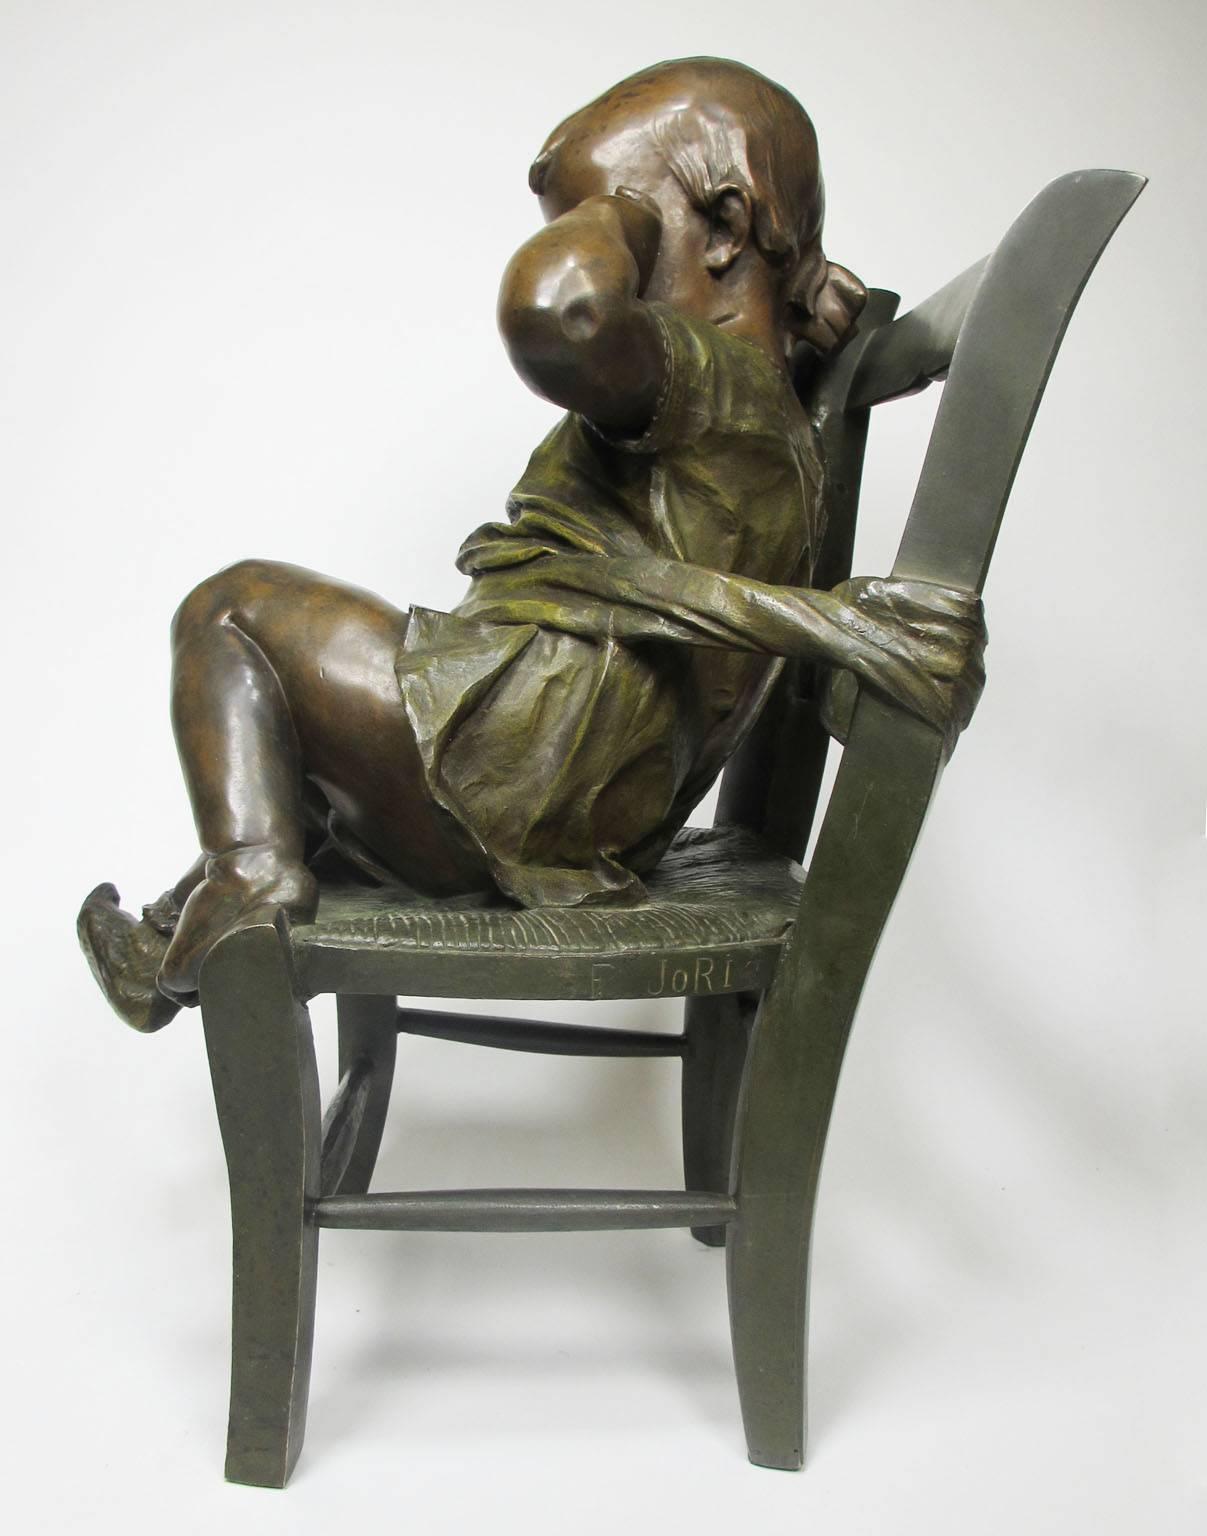 Early 20th Century French 19th Century Patinated Bronze Sculpture an Infant Girl Seated in a Chair